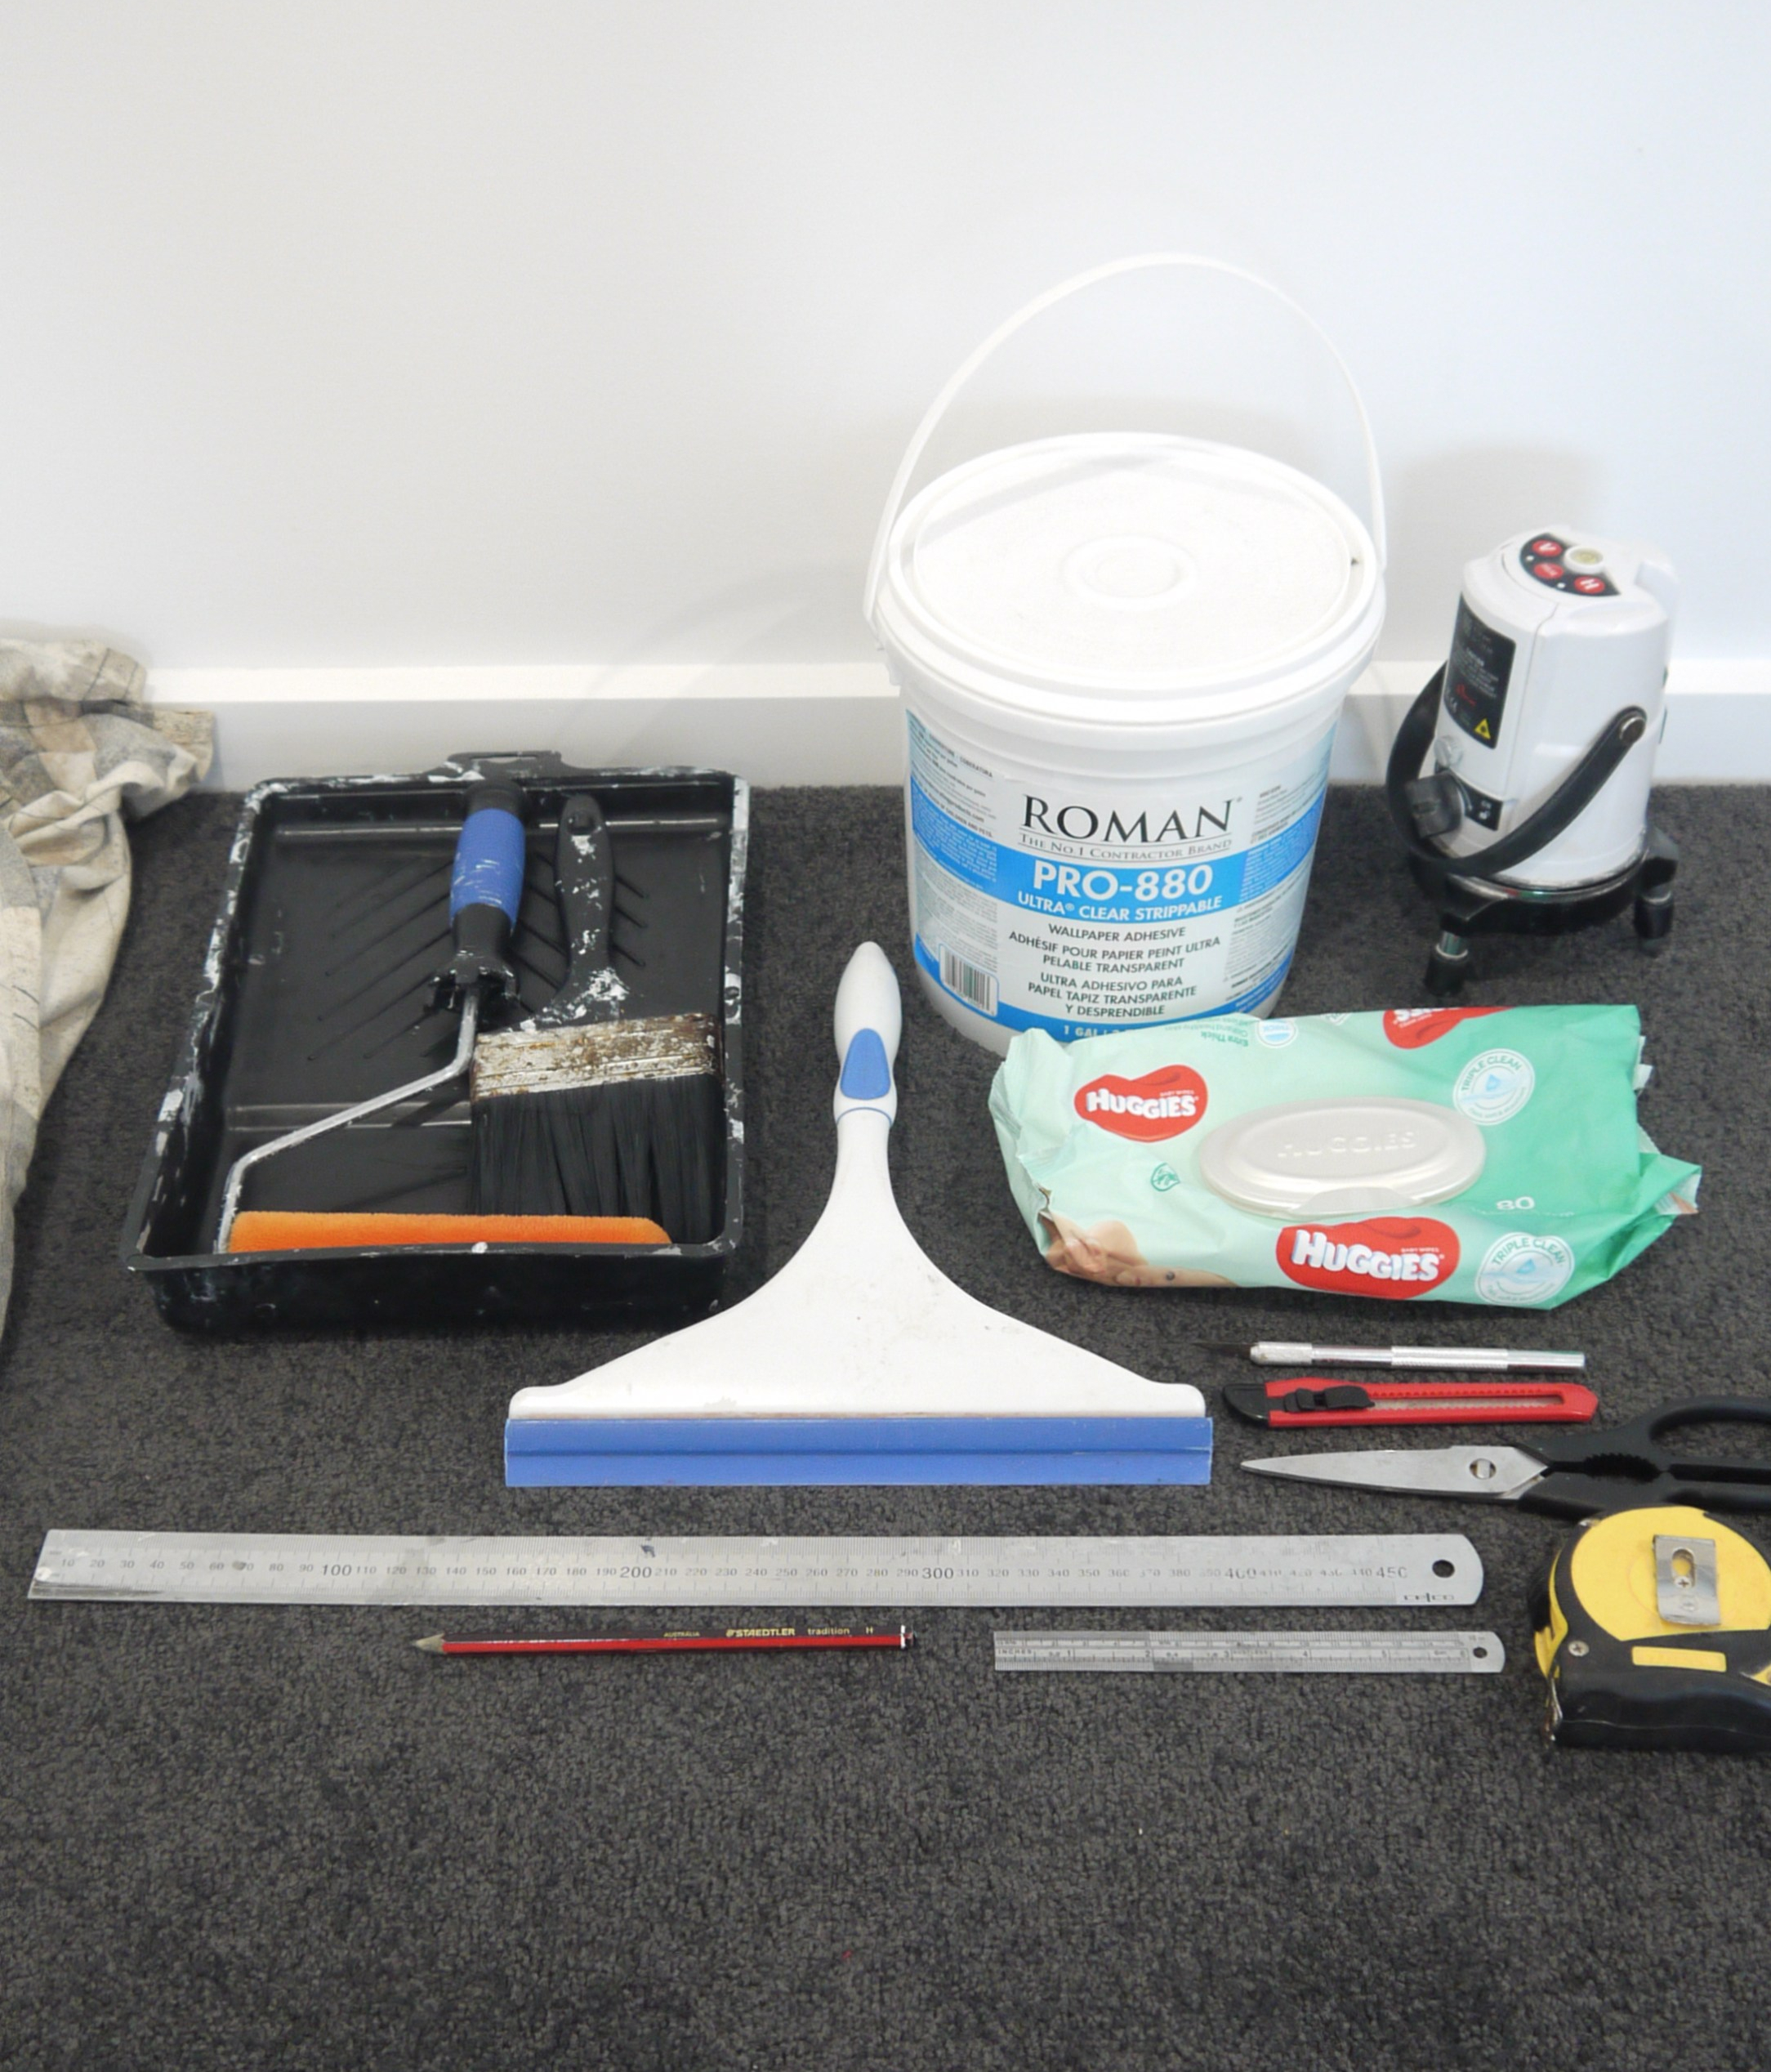 All the supplies needed to complete a vinyl heavy duty wallpaper wall covering installation. Heavy duty adhesive, laser level, steel ruler, stanley knife, tape measure, squeegie, baby wipes, paint roller and brush. 